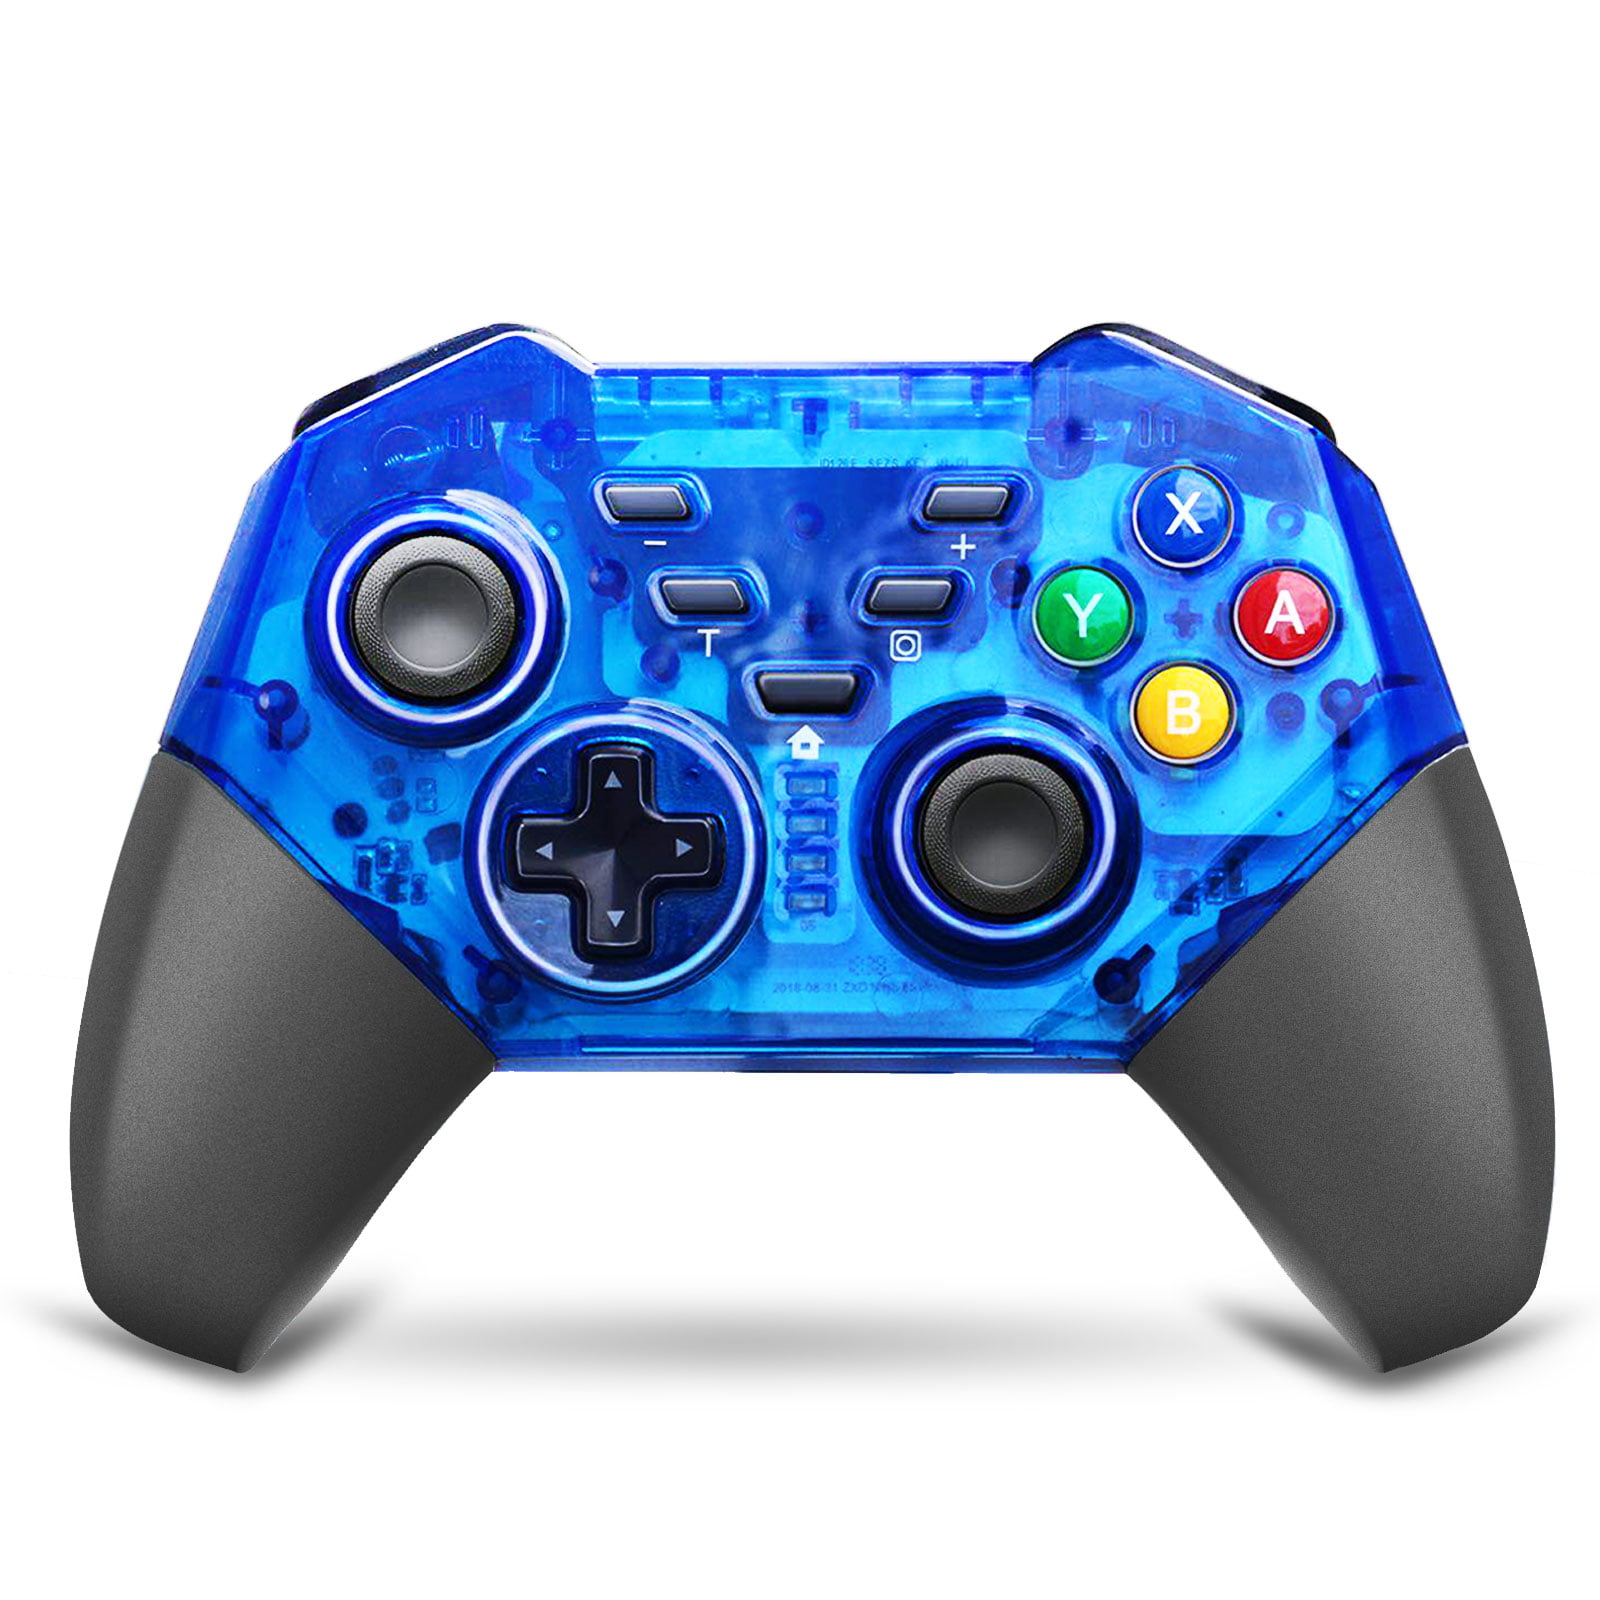 Button ABS Plastic Material for Gamepad Controller Blue 